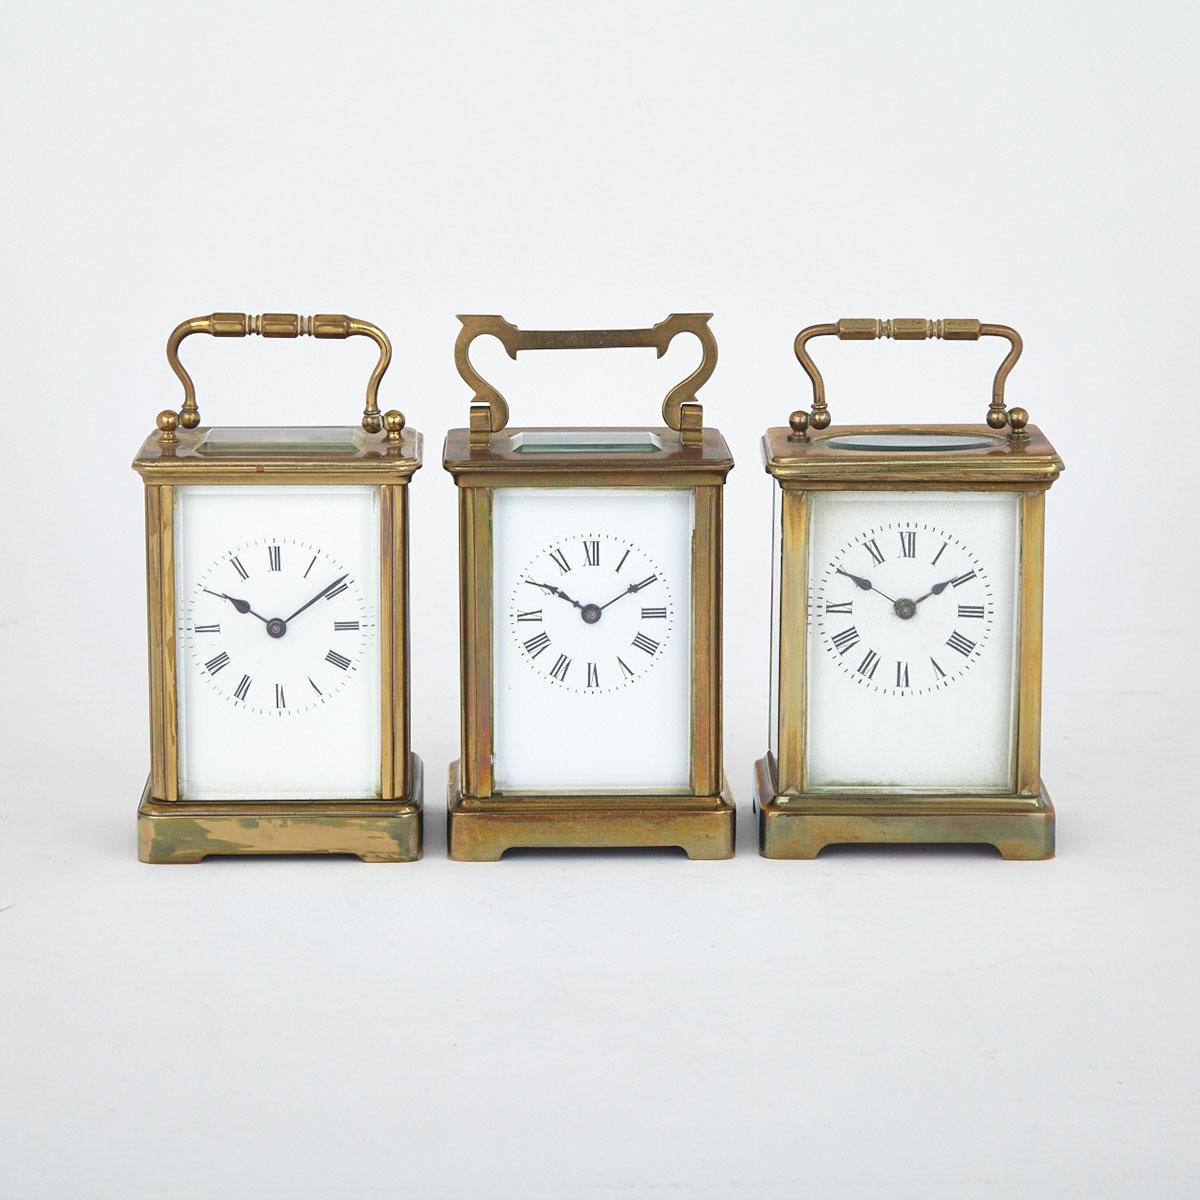 Three French Gilt Brass Carriage Timepieces, c.1900